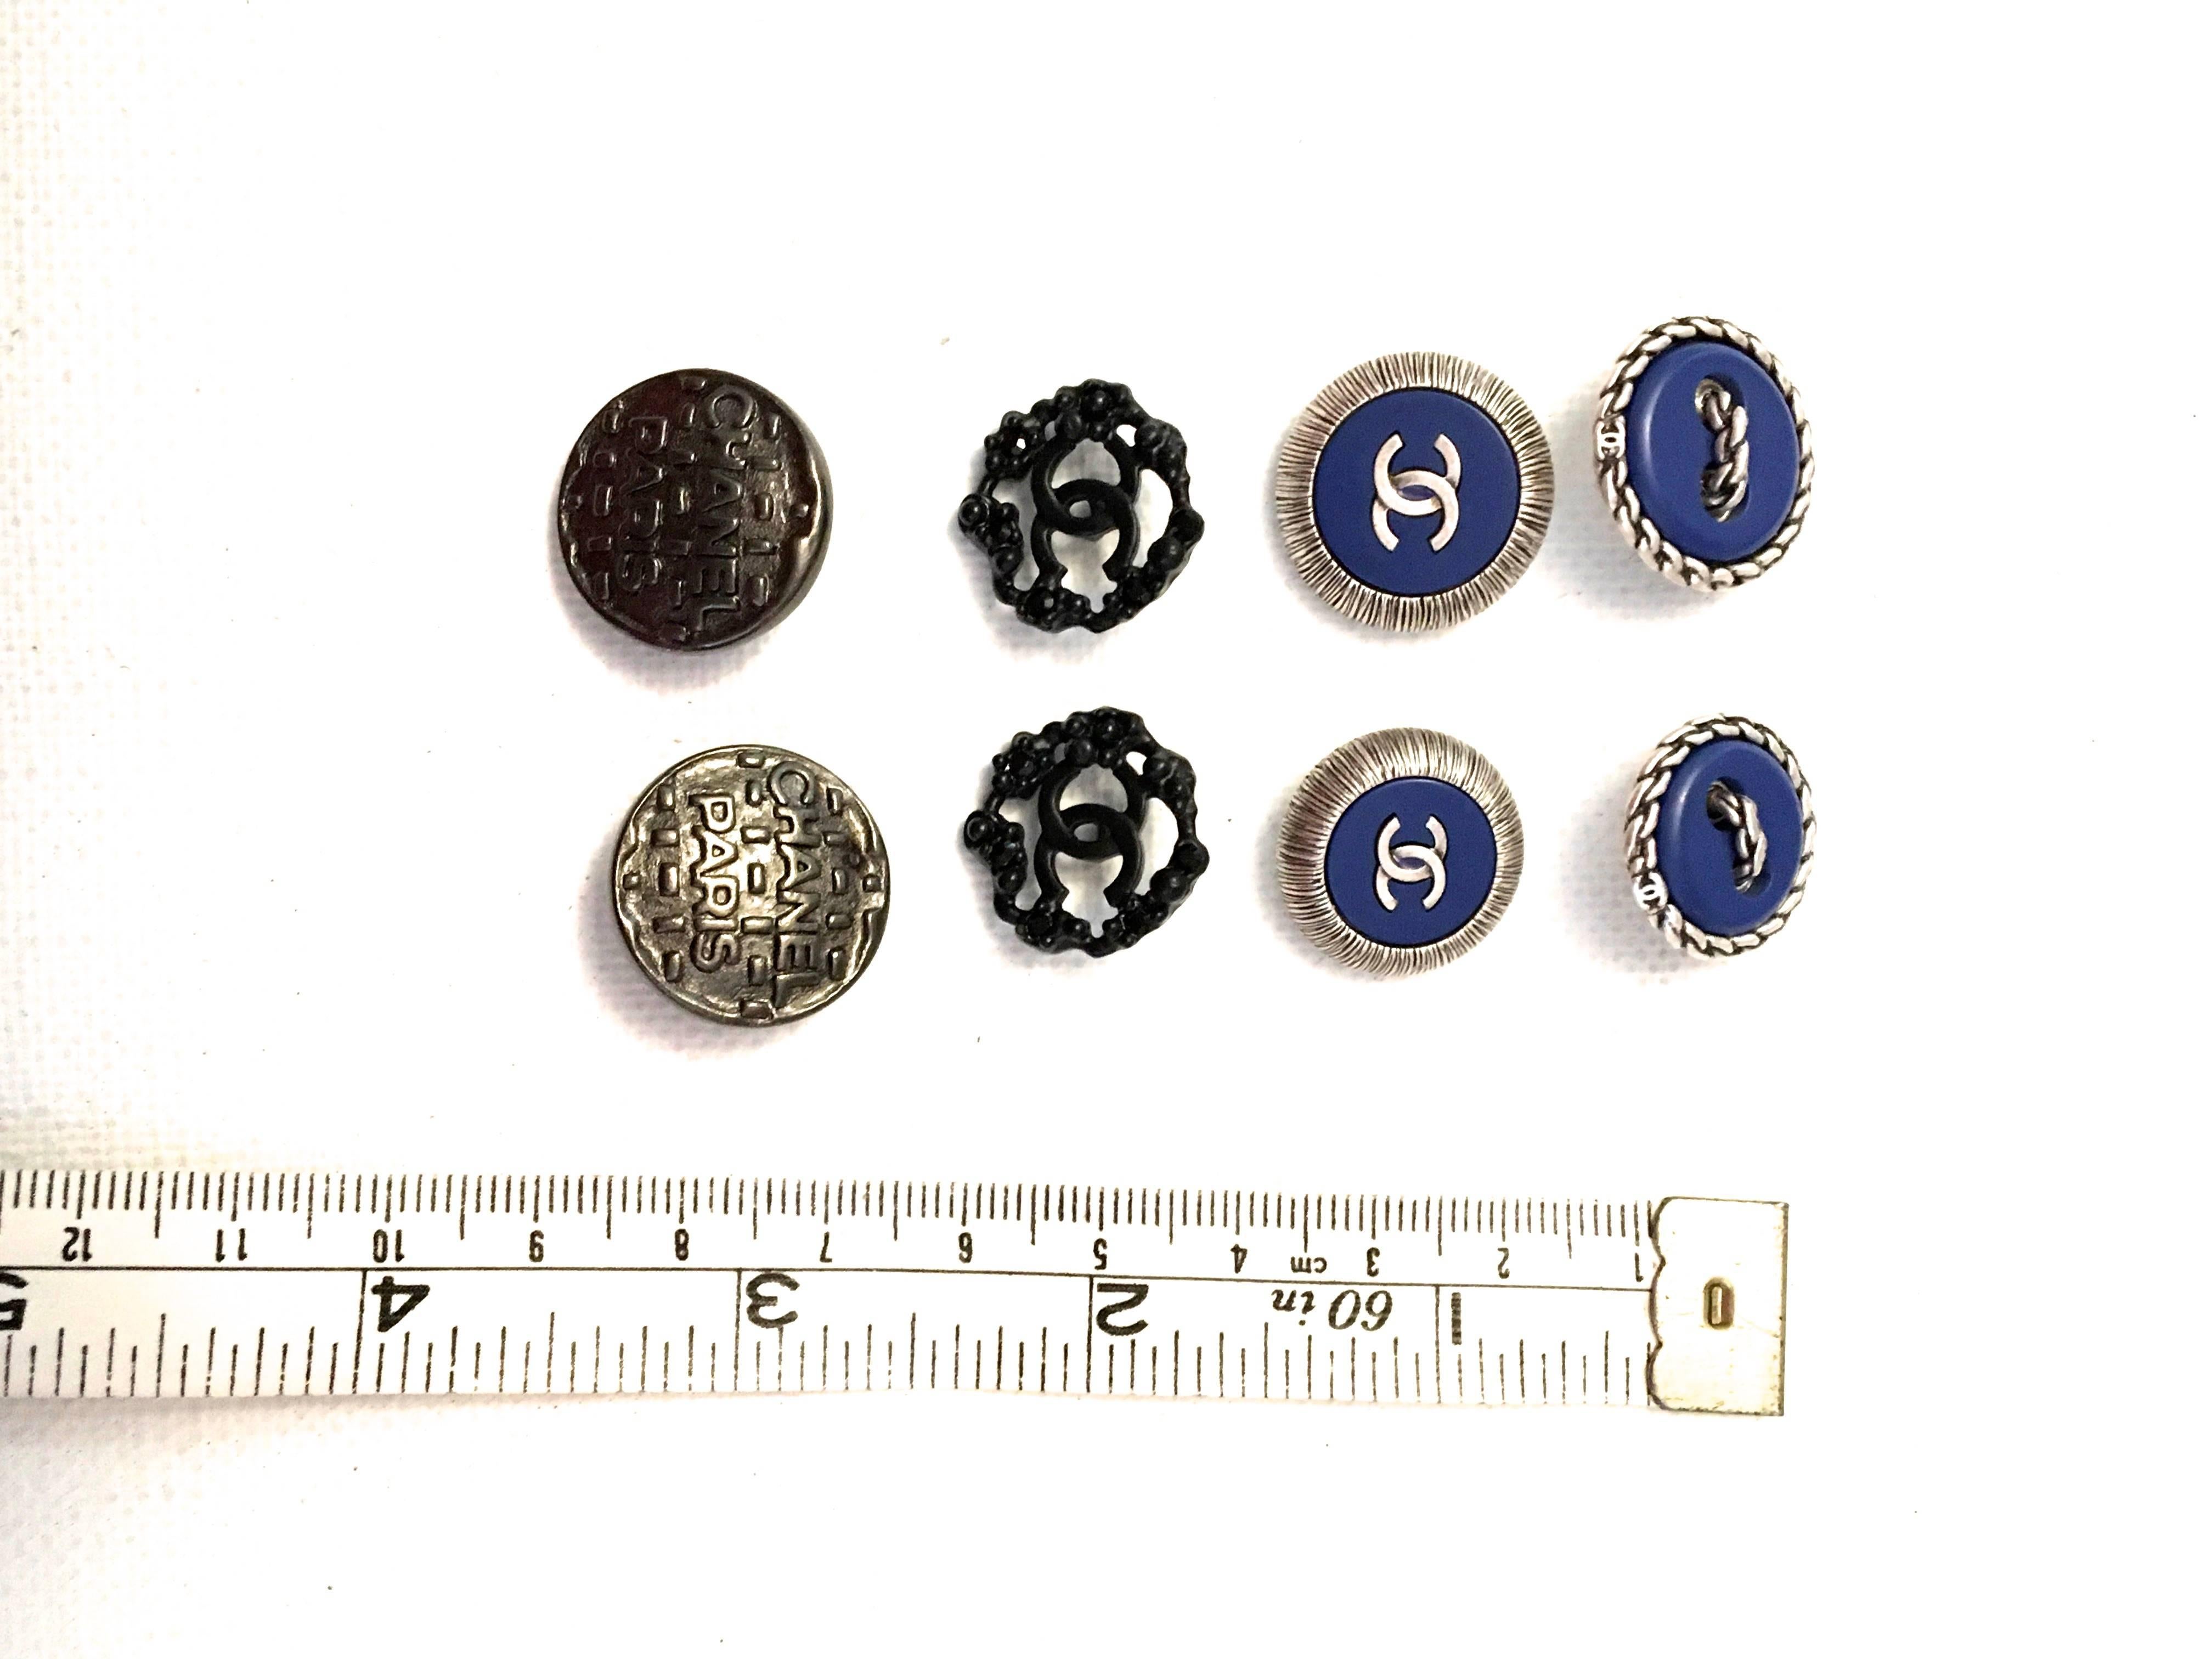 Presented here is an assorted lot of 8 Chanel buttons. 

- One pair of the buttons measures 0.8 inches in diameter and the buttons are gun metal gray. The buttons read 'CHANEL PARIS' on the front. On the reverse of the buttons it reads 'Chanel.' 
-